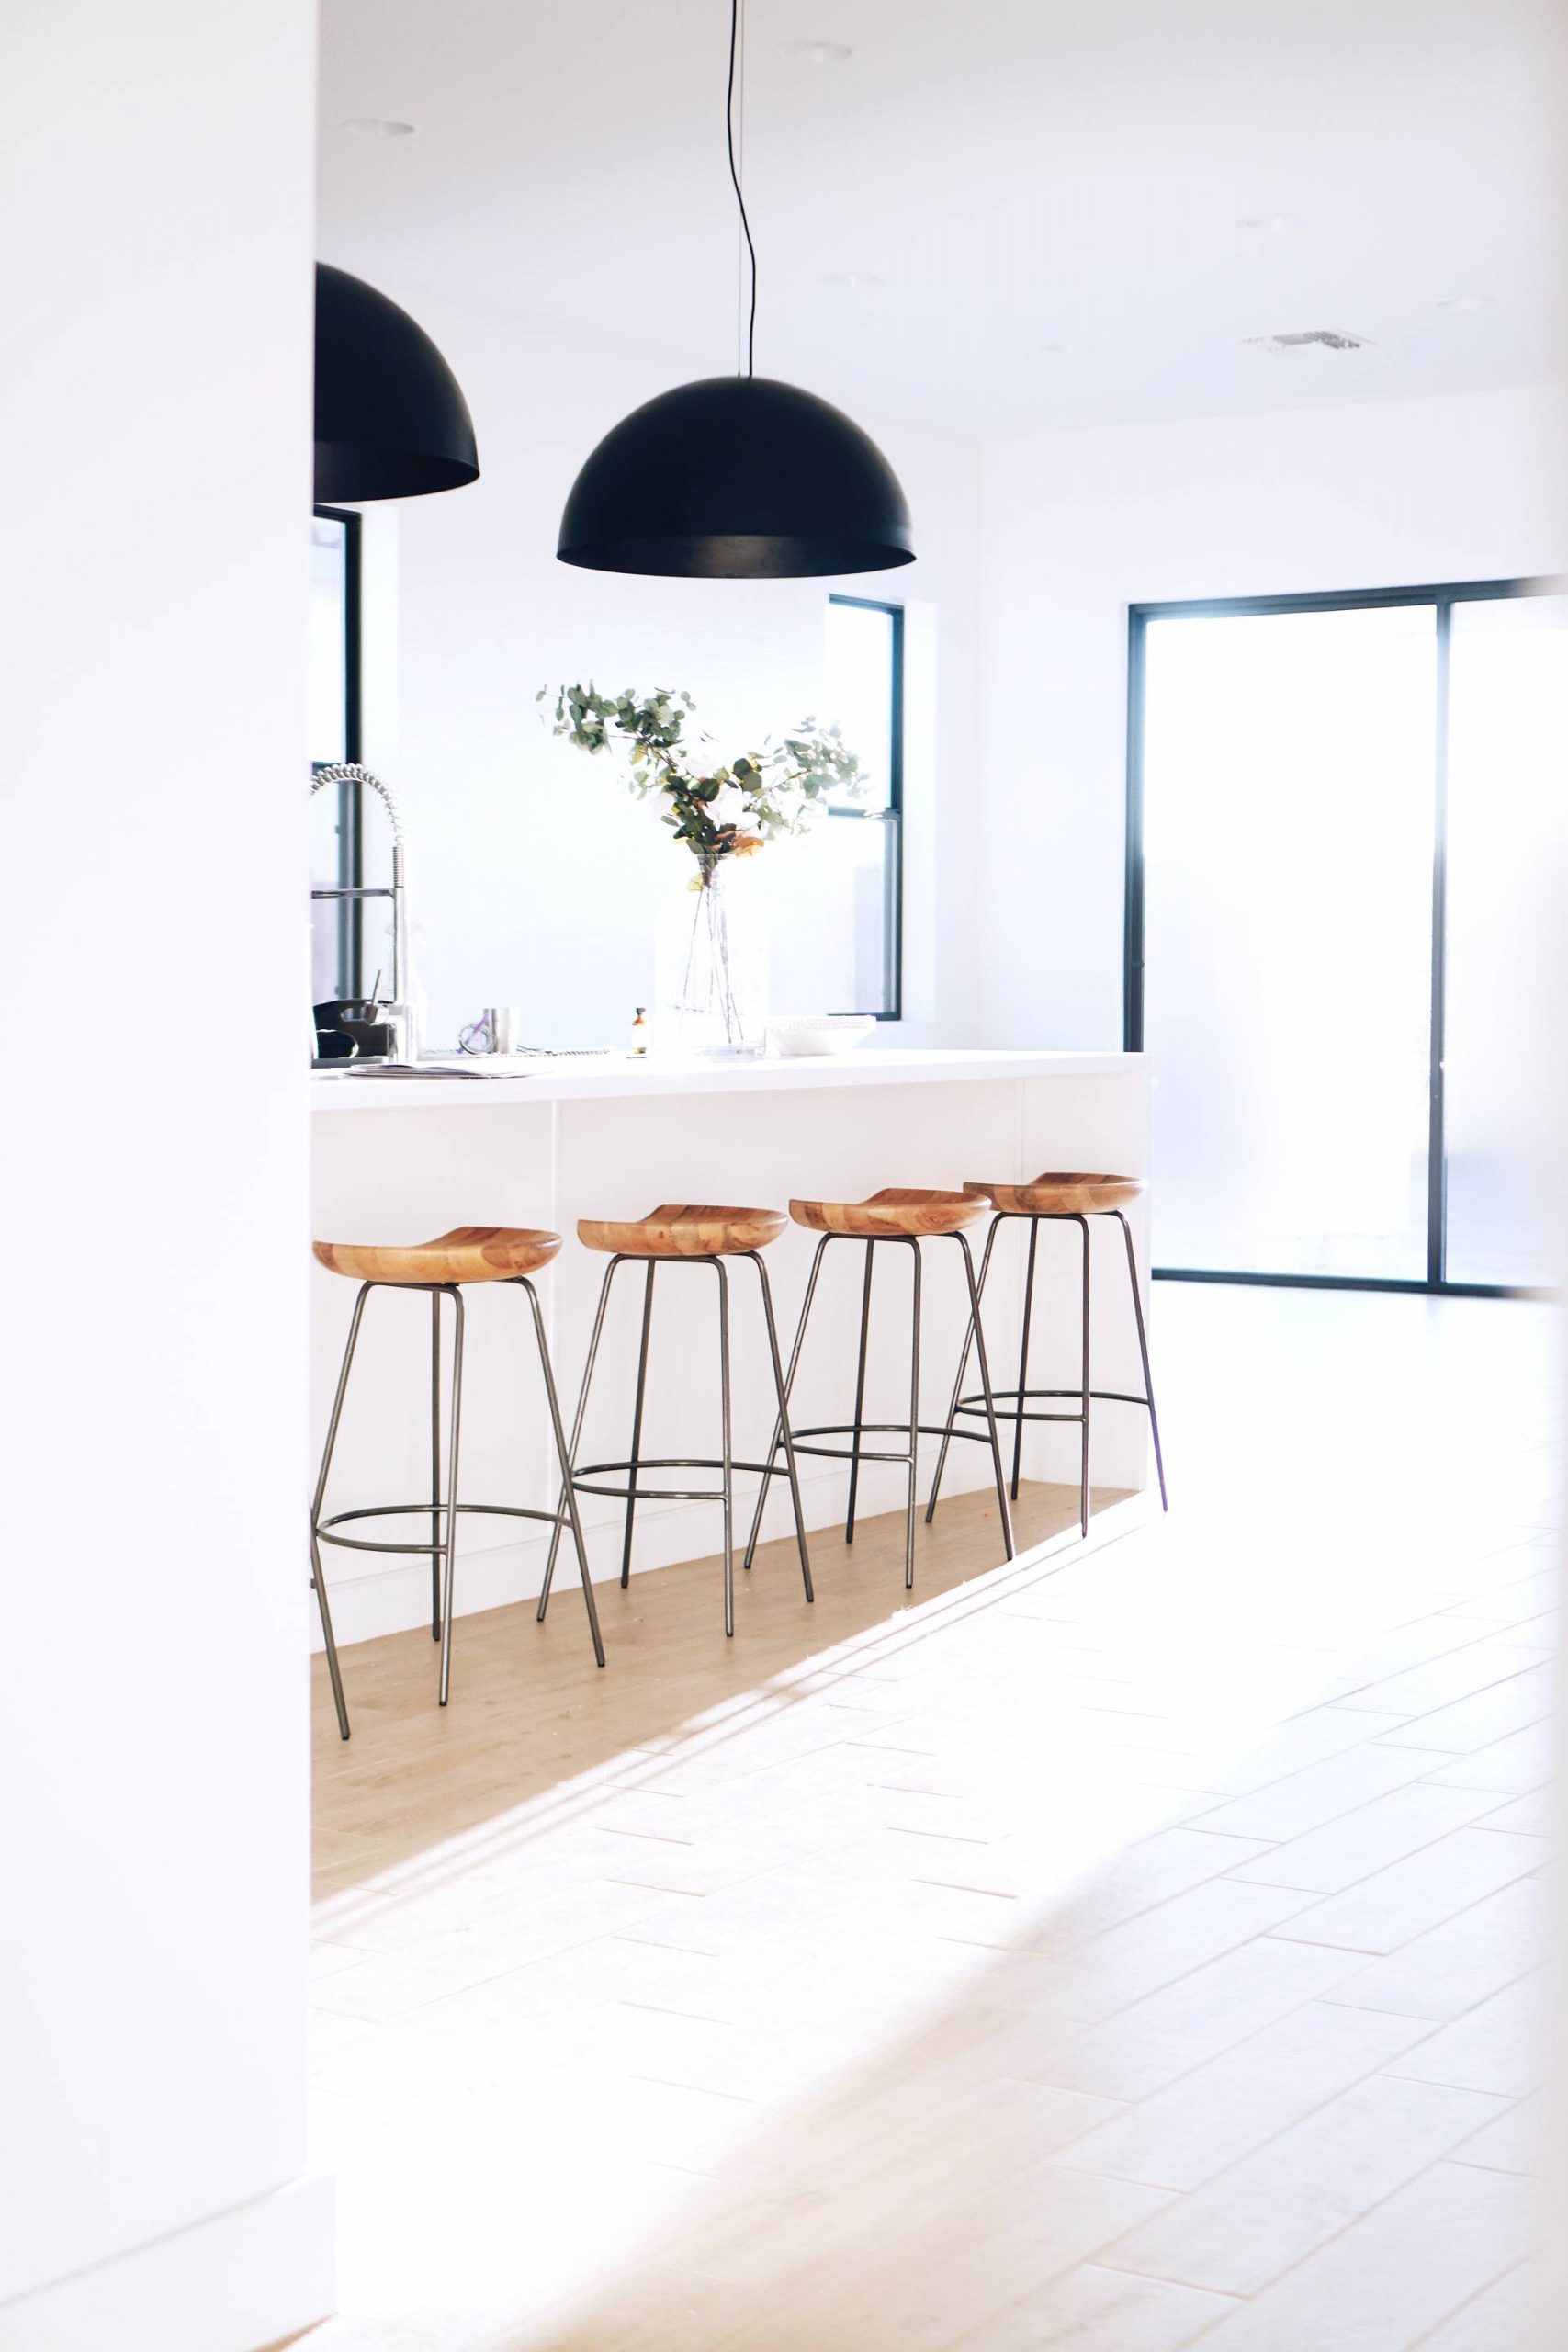 How to bring minimalism into your home